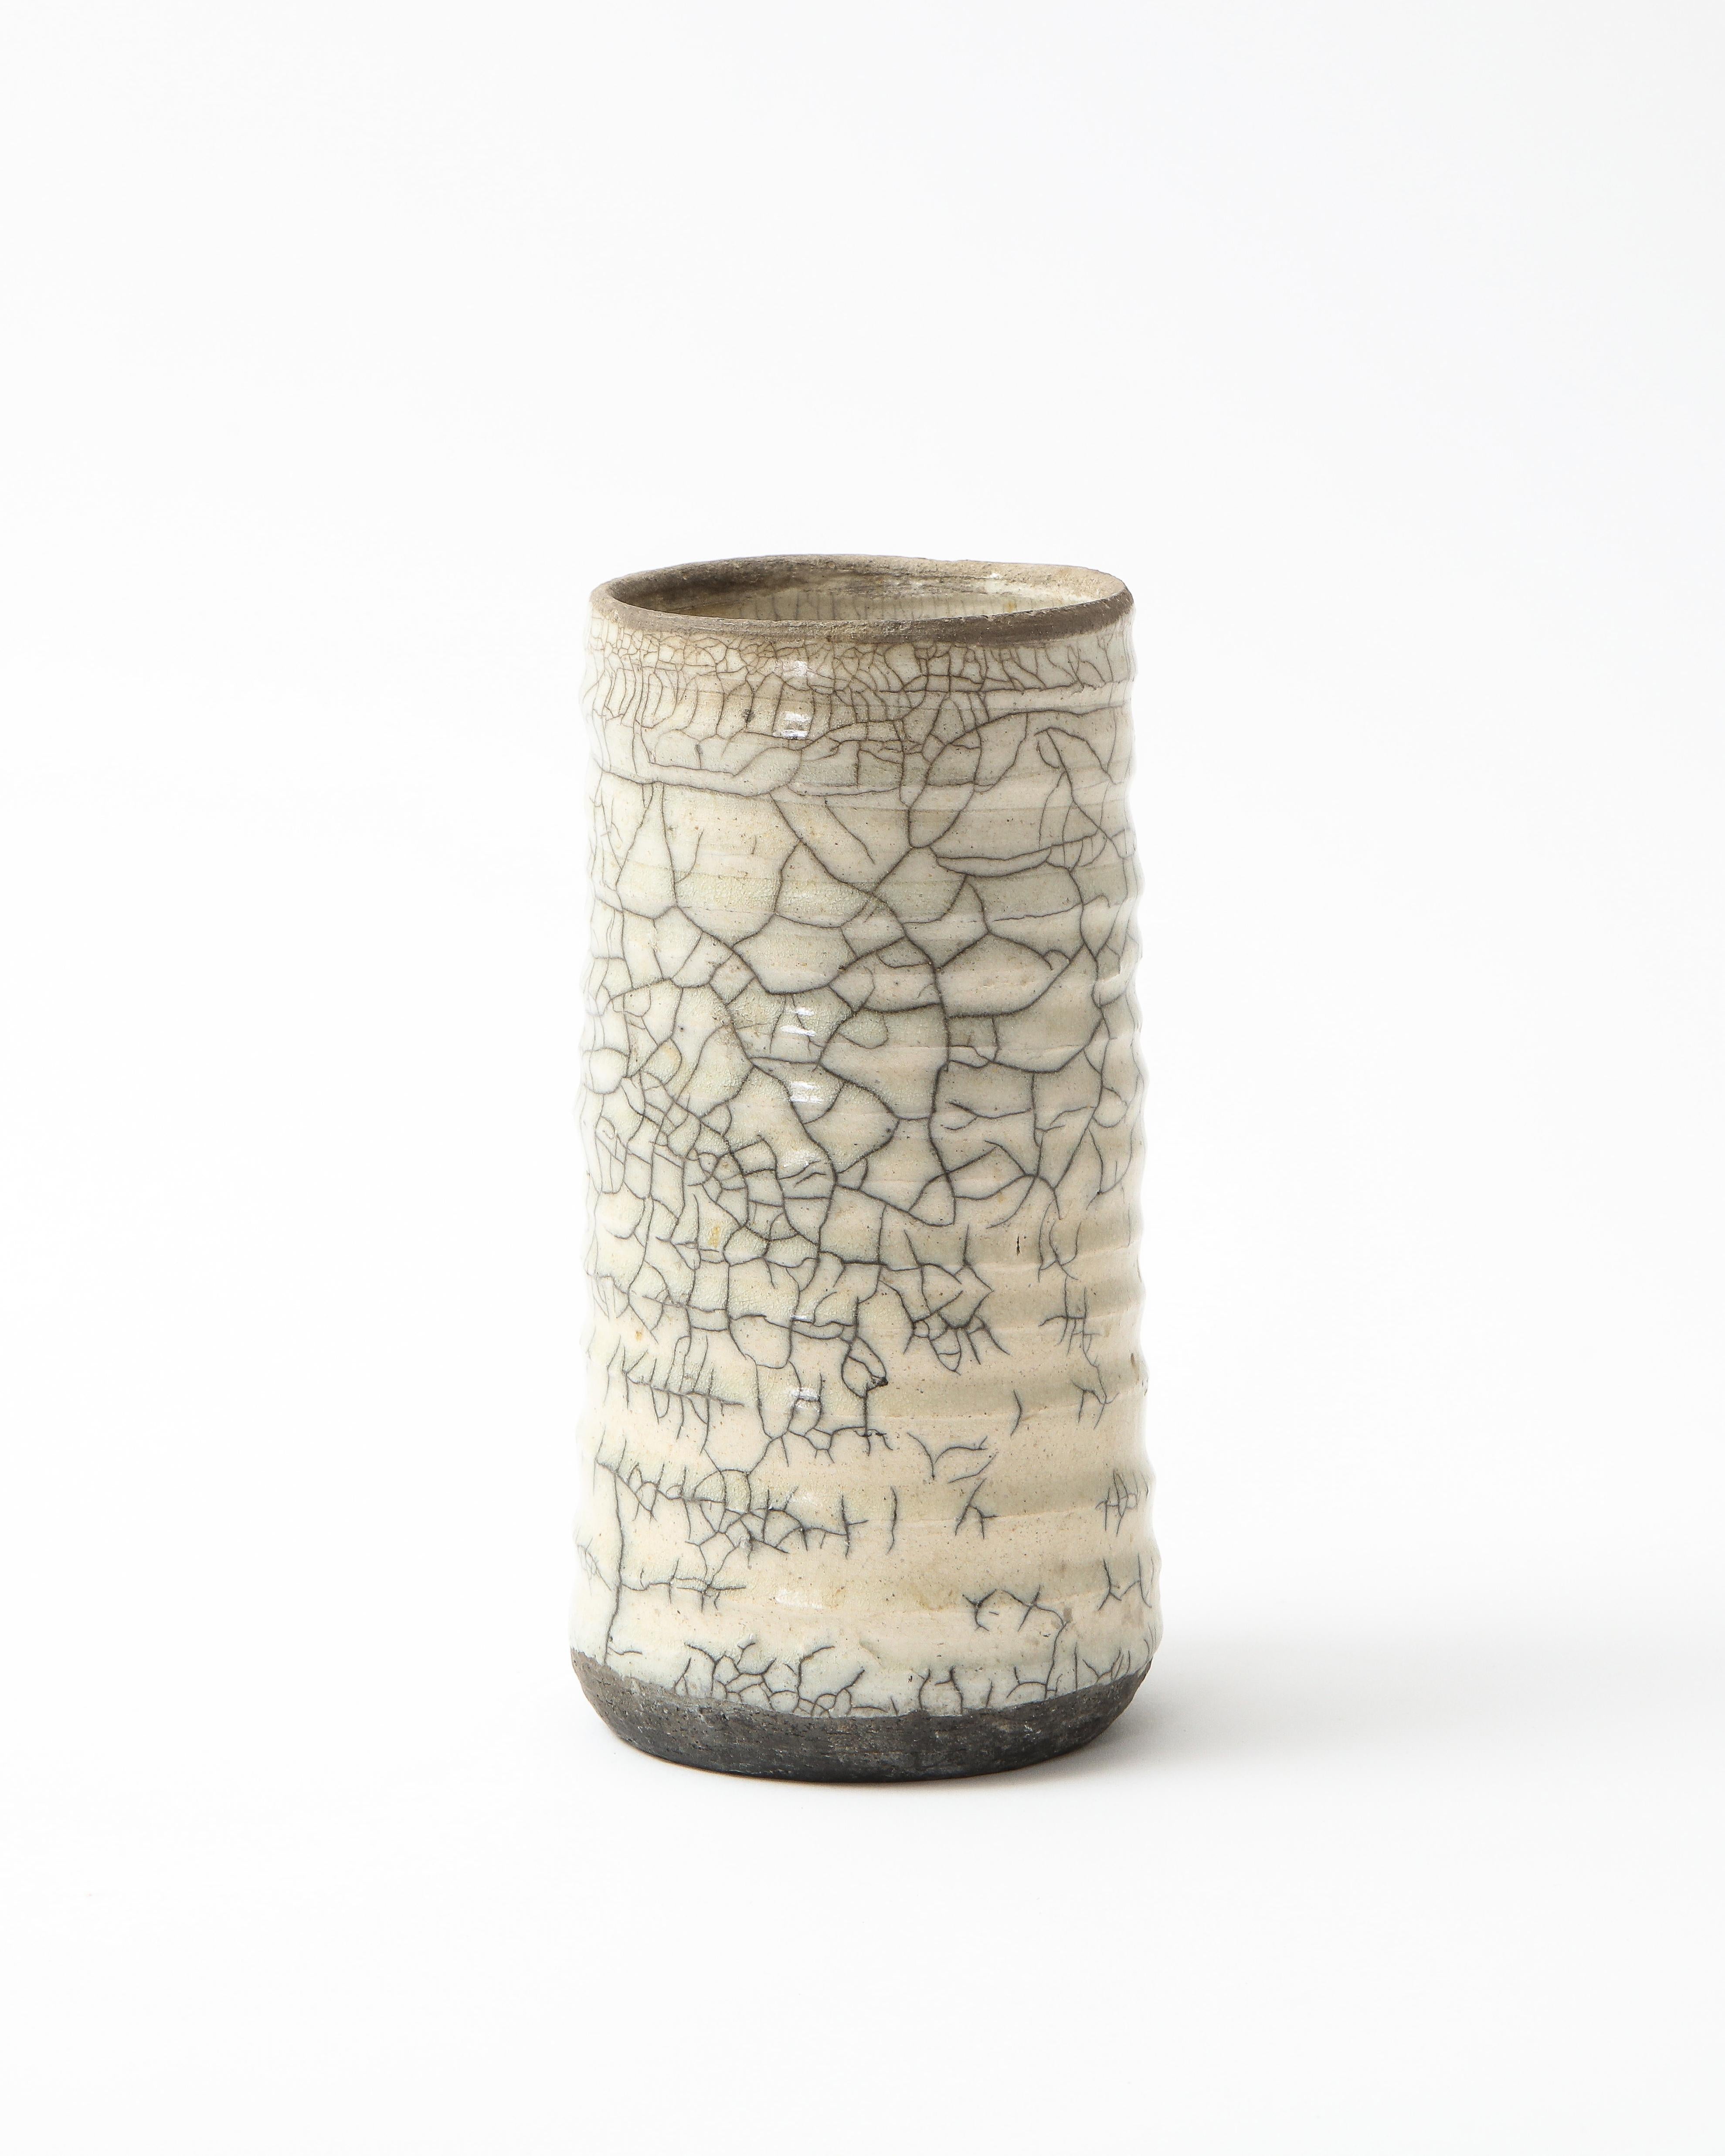 Off-White Ceramic Vase with Intricate Crackling 11